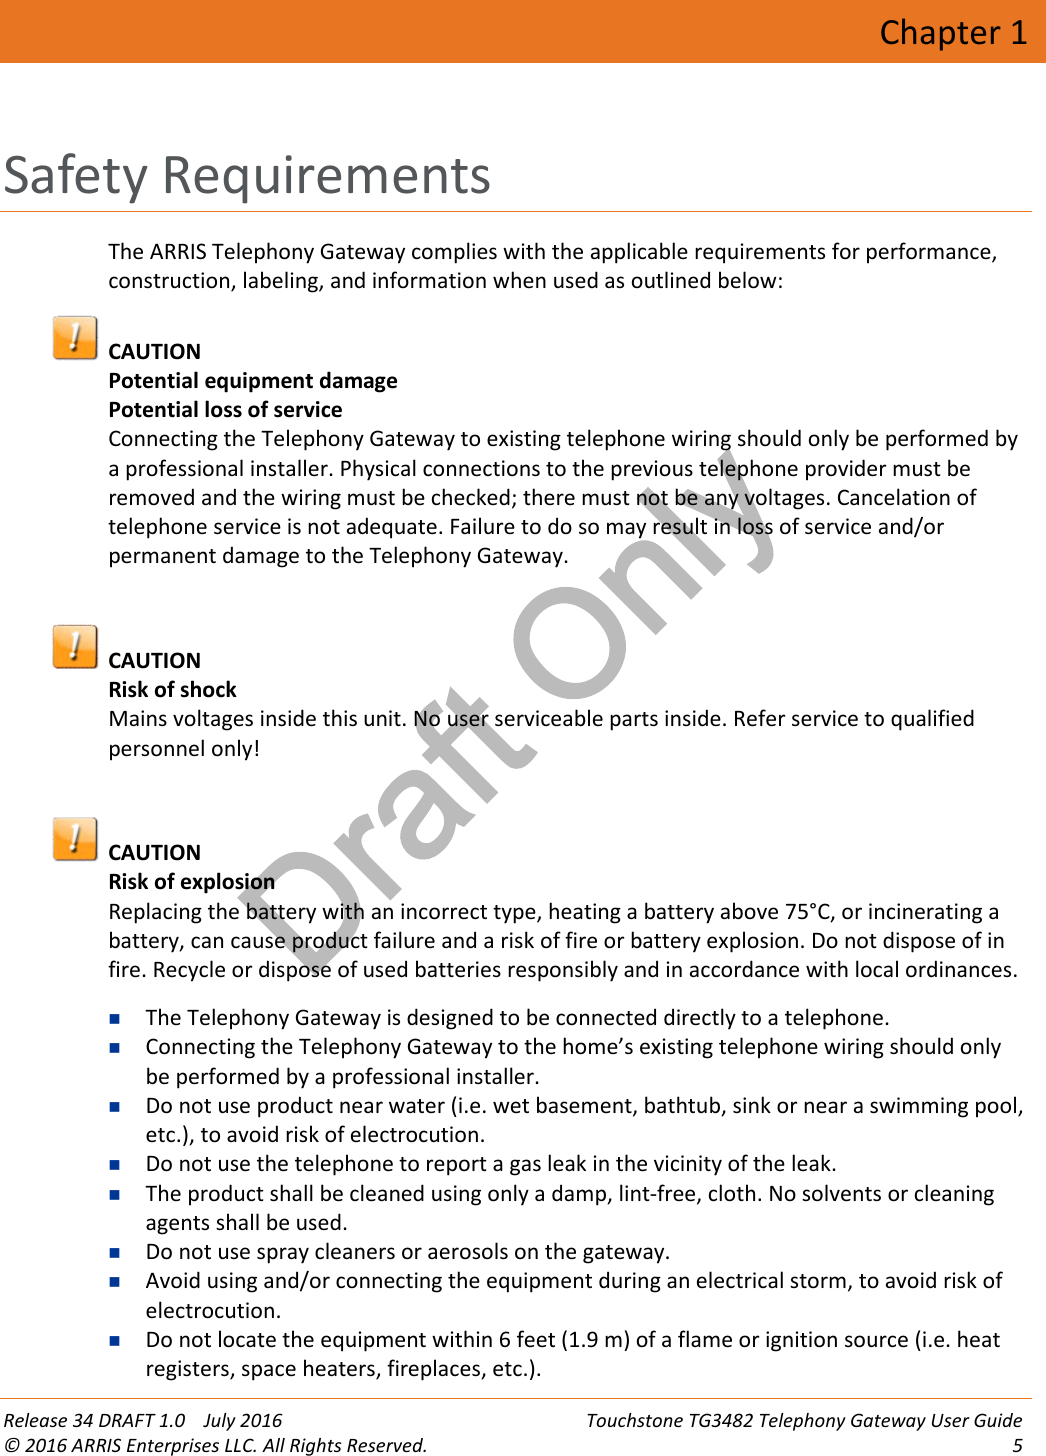 Draft OnlyRelease 34 DRAFT 1.0 July 2016 Touchstone TG3482 Telephony Gateway User Guide© 2016 ARRIS Enterprises LLC. All Rights Reserved. 5Chapter 1Safety RequirementsThe ARRIS Telephony Gateway complies with the applicable requirements for performance,construction, labeling, and information when used as outlined below:CAUTIONPotential equipment damagePotential loss of serviceConnecting the Telephony Gateway to existing telephone wiring should only be performed bya professional installer. Physical connections to the previous telephone provider must beremoved and the wiring must be checked; there must not be any voltages. Cancelation oftelephone service is not adequate. Failure to do so may result in loss of service and/orpermanent damage to the Telephony Gateway.CAUTIONRisk of shockMains voltages inside this unit. No user serviceable parts inside. Refer service to qualifiedpersonnel only!CAUTIONRisk of explosionReplacing the battery with an incorrect type, heating a battery above 75°C, or incinerating abattery, can cause product failure and a risk of fire or battery explosion. Do not dispose of infire. Recycle or dispose of used batteries responsibly and in accordance with local ordinances.The Telephony Gateway is designed to be connected directly to a telephone.Connecting the Telephony Gateway to the home’s existing telephone wiring should onlybe performed by a professional installer.Do not use product near water (i.e. wet basement, bathtub, sink or near a swimming pool,etc.), to avoid risk of electrocution.Do not use the telephone to report a gas leak in the vicinity of the leak.The product shall be cleaned using only a damp, lint-free, cloth. No solvents or cleaningagents shall be used.Do not use spray cleaners or aerosols on the gateway.Avoid using and/or connecting the equipment during an electrical storm, to avoid risk ofelectrocution.Do not locate the equipment within 6 feet (1.9 m) of a flame or ignition source (i.e. heatregisters, space heaters, fireplaces, etc.).